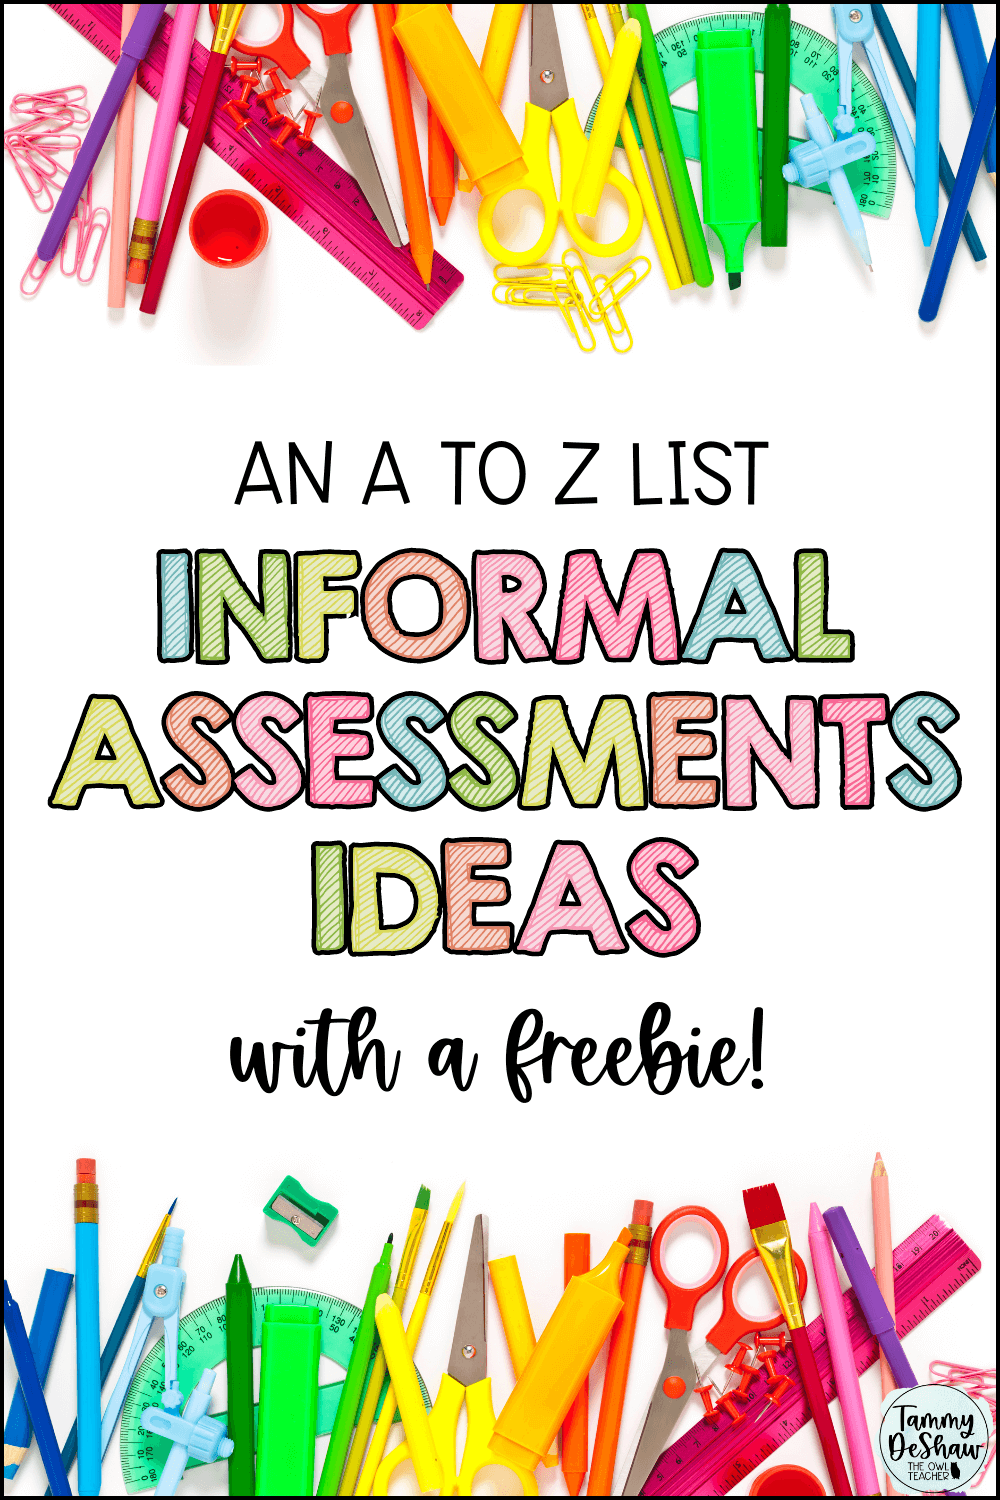 If you're bored with the same informal assessments such as the ticket out the door, check out this list of assessment ideas that are low prep and engaging for your classroom. This blog post includes an A to Z list of ideas for informal assessments with a FREE printable. via @deshawtammygmail.com